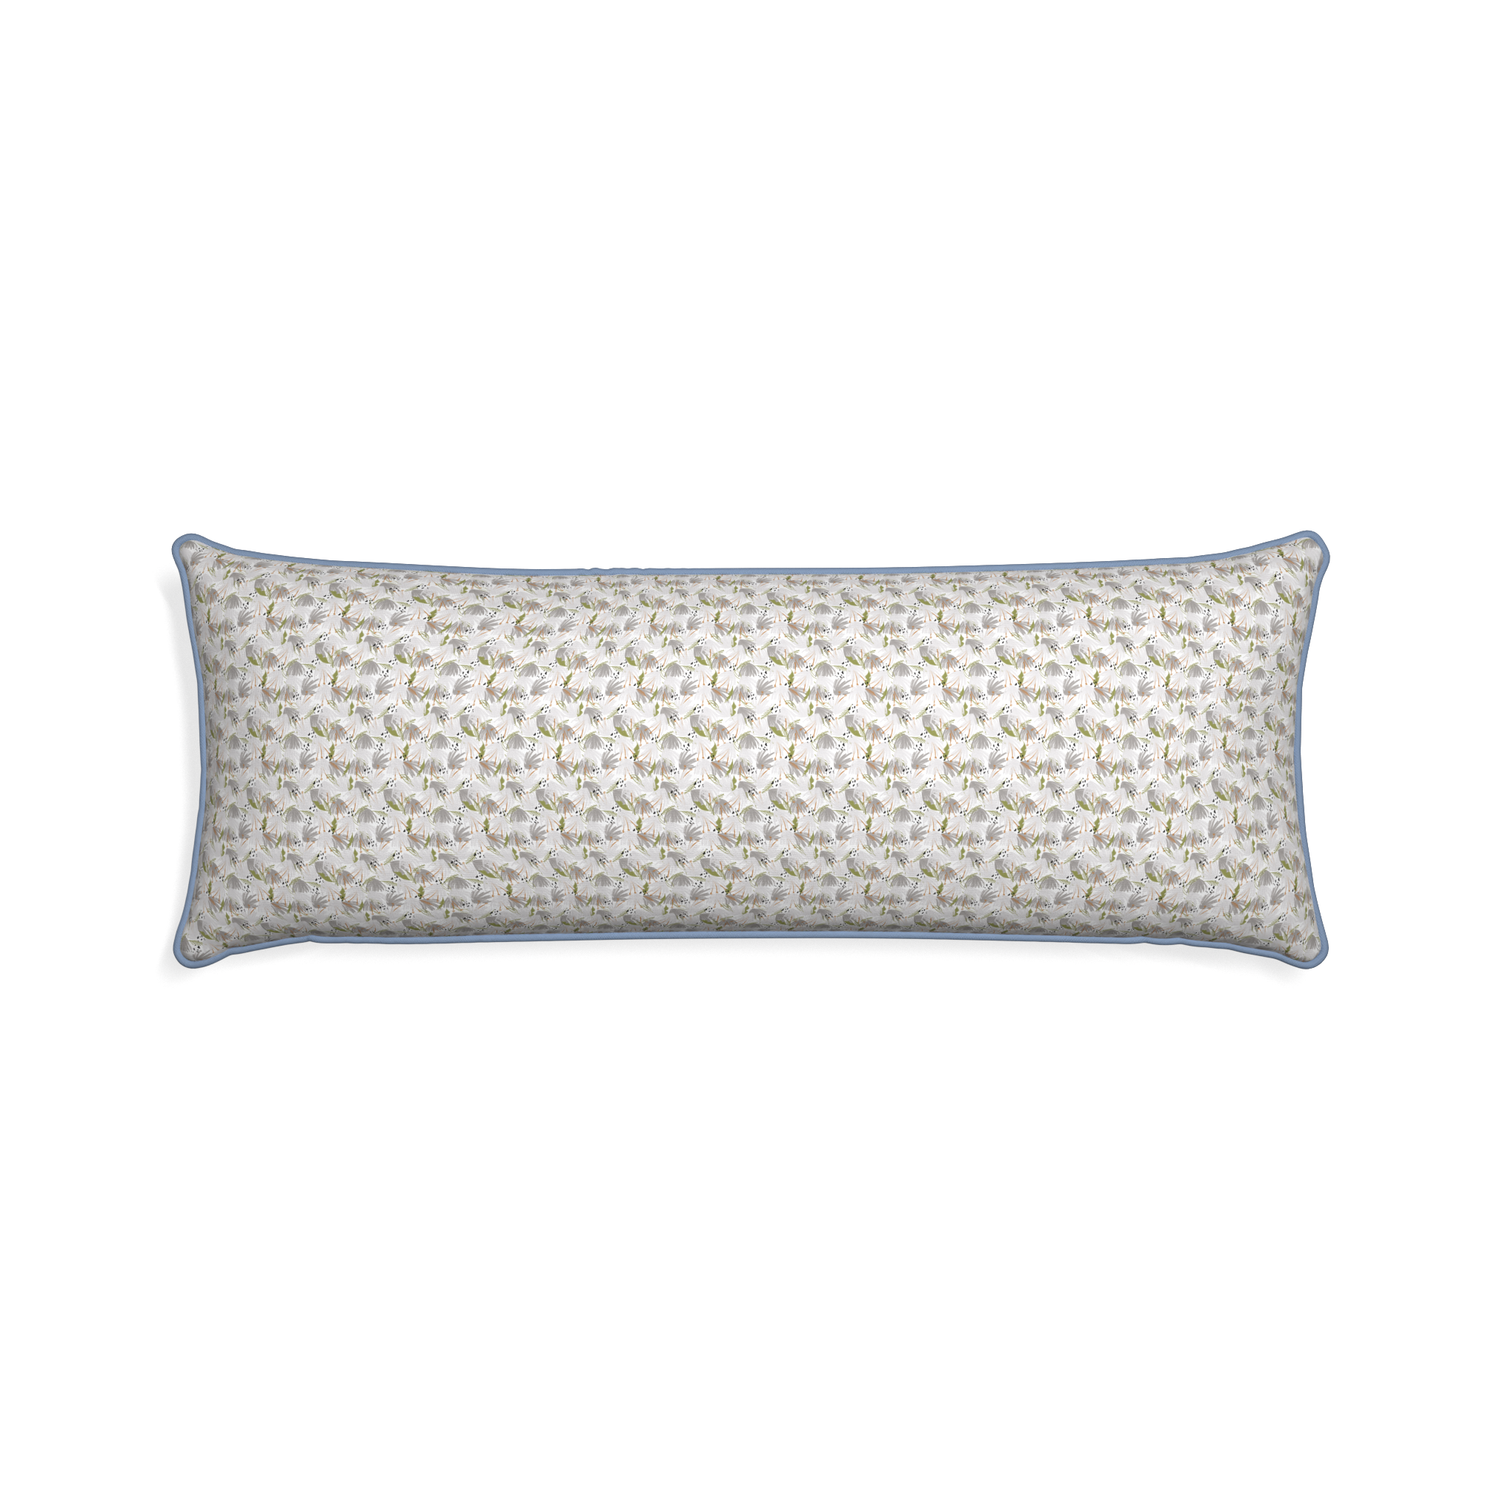 Xl-lumbar eden grey custom pillow with sky piping on white background